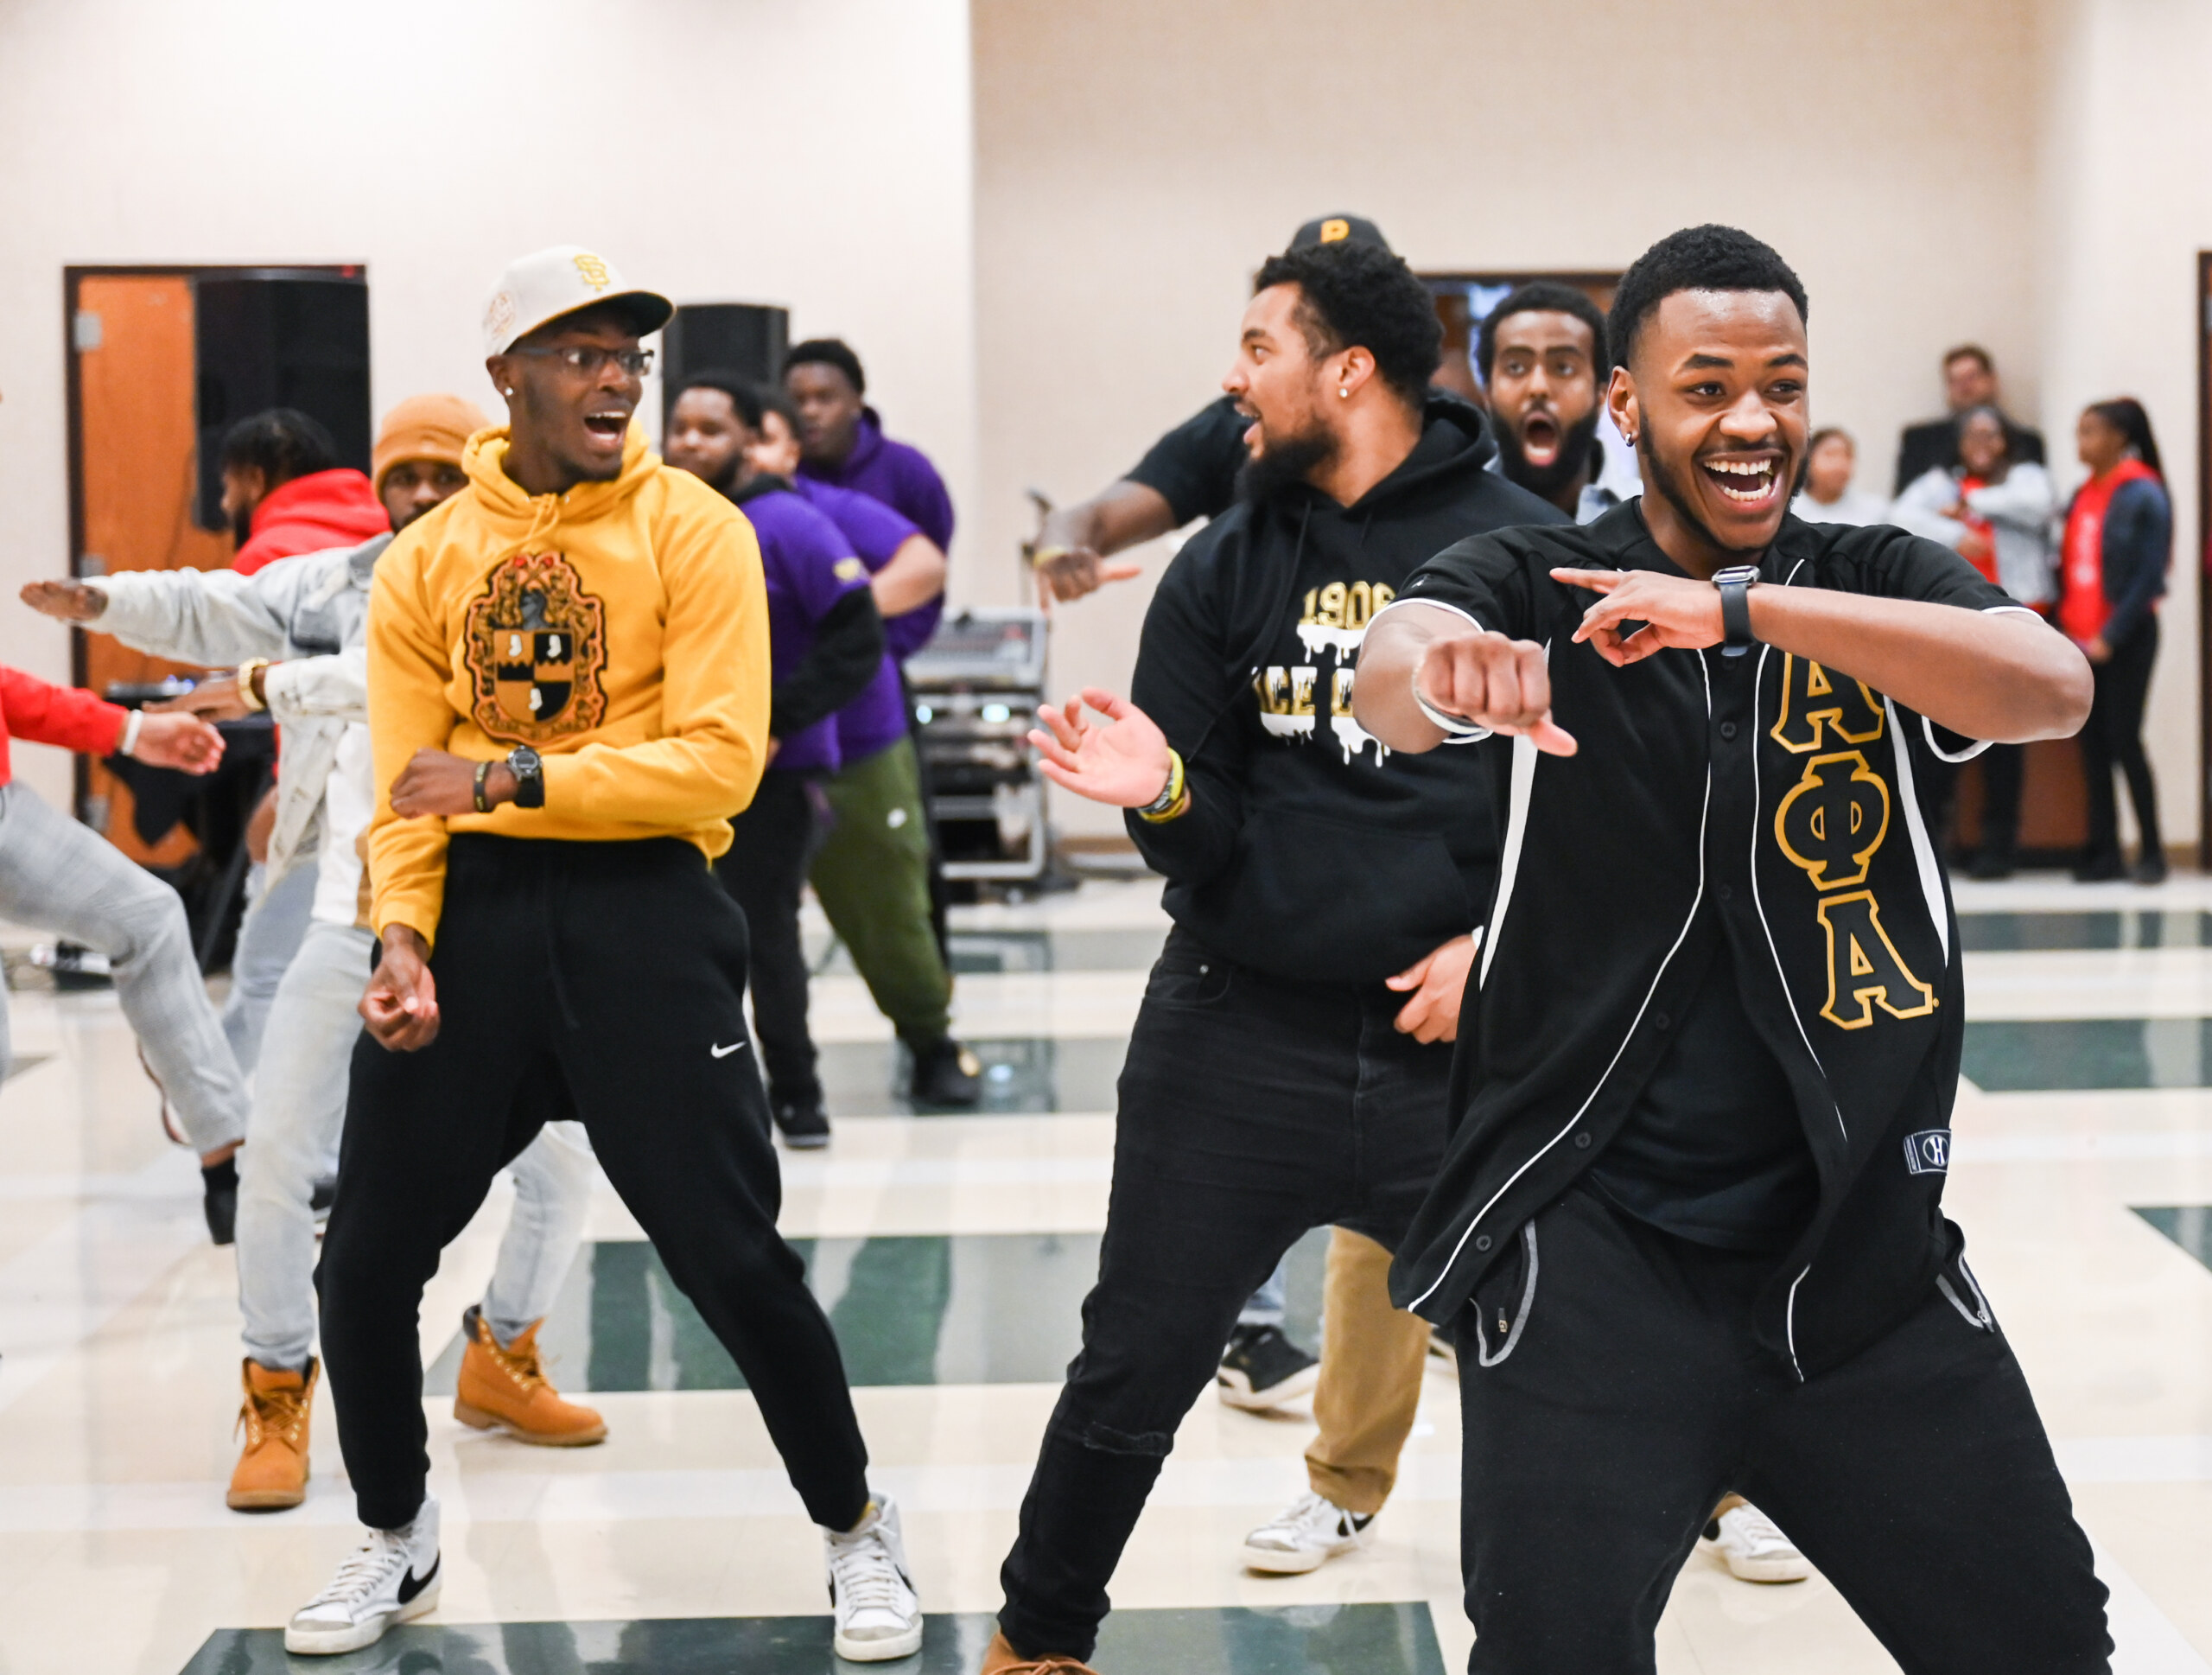 A Taste of UTC Black History Month events kick off with pep rally